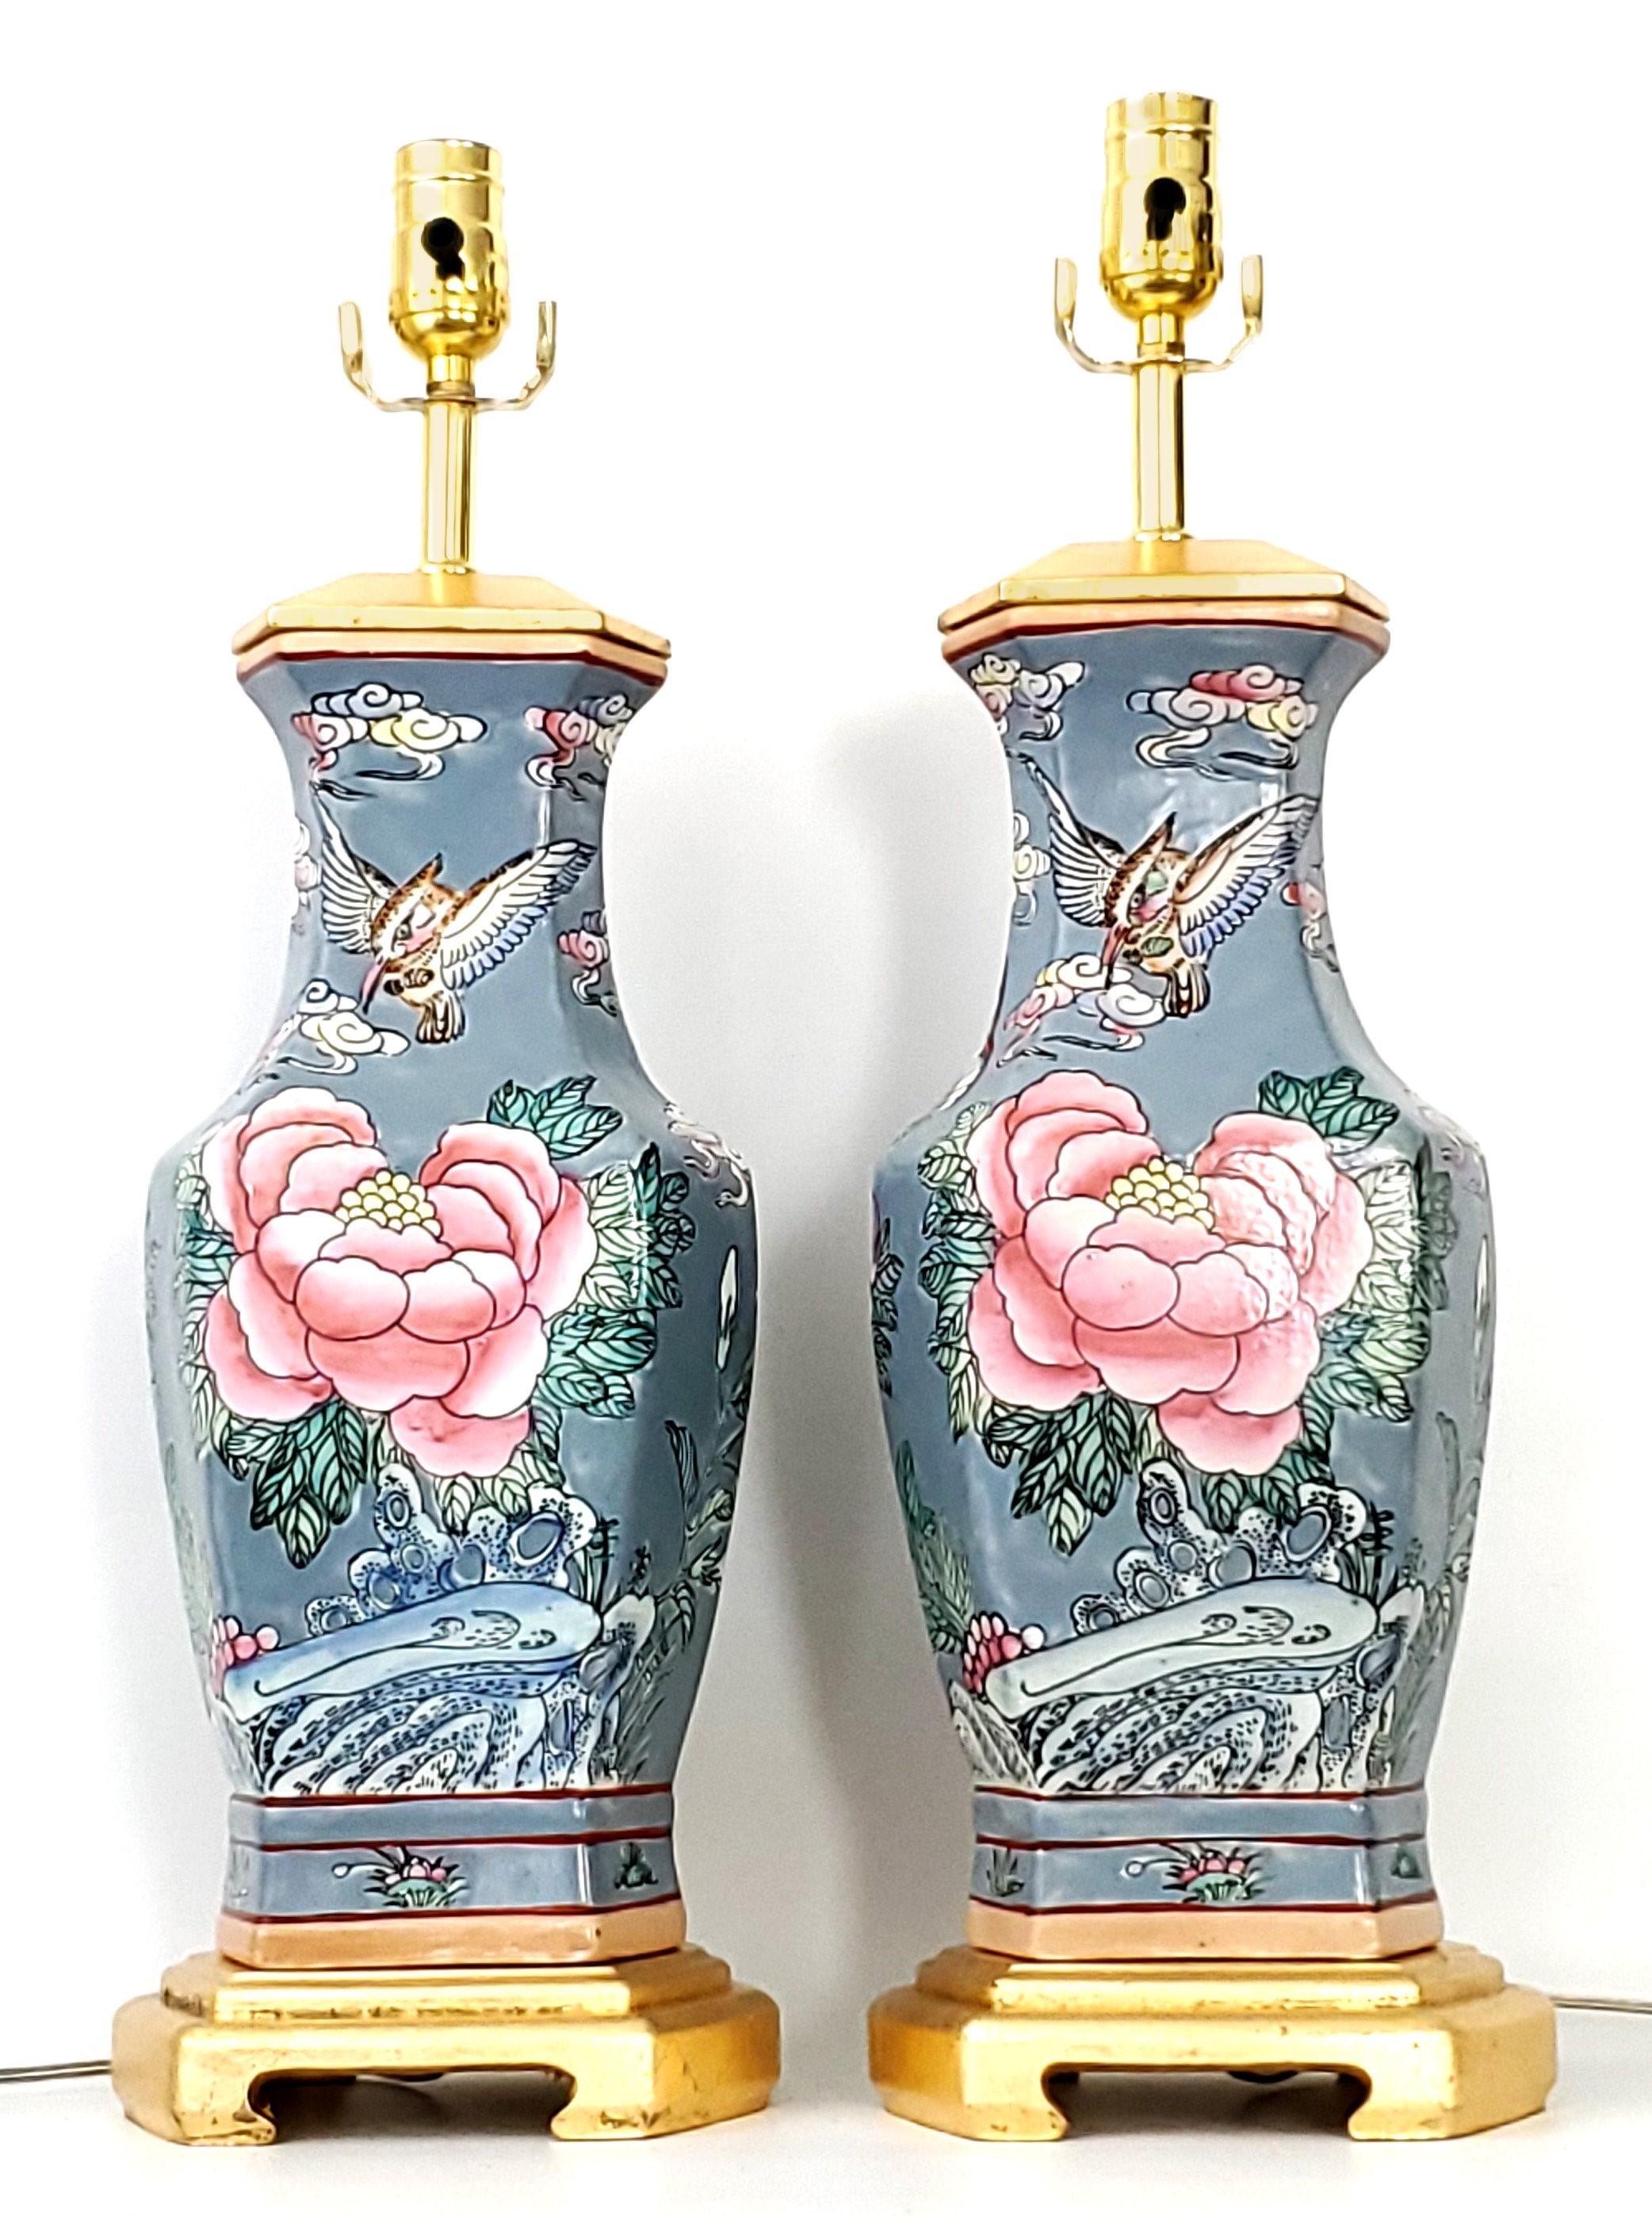 Pair of Vintage Chinese Porcelain Ceramic Table Lamps with Pink Lamp Shades In Excellent Condition For Sale In Miami, FL